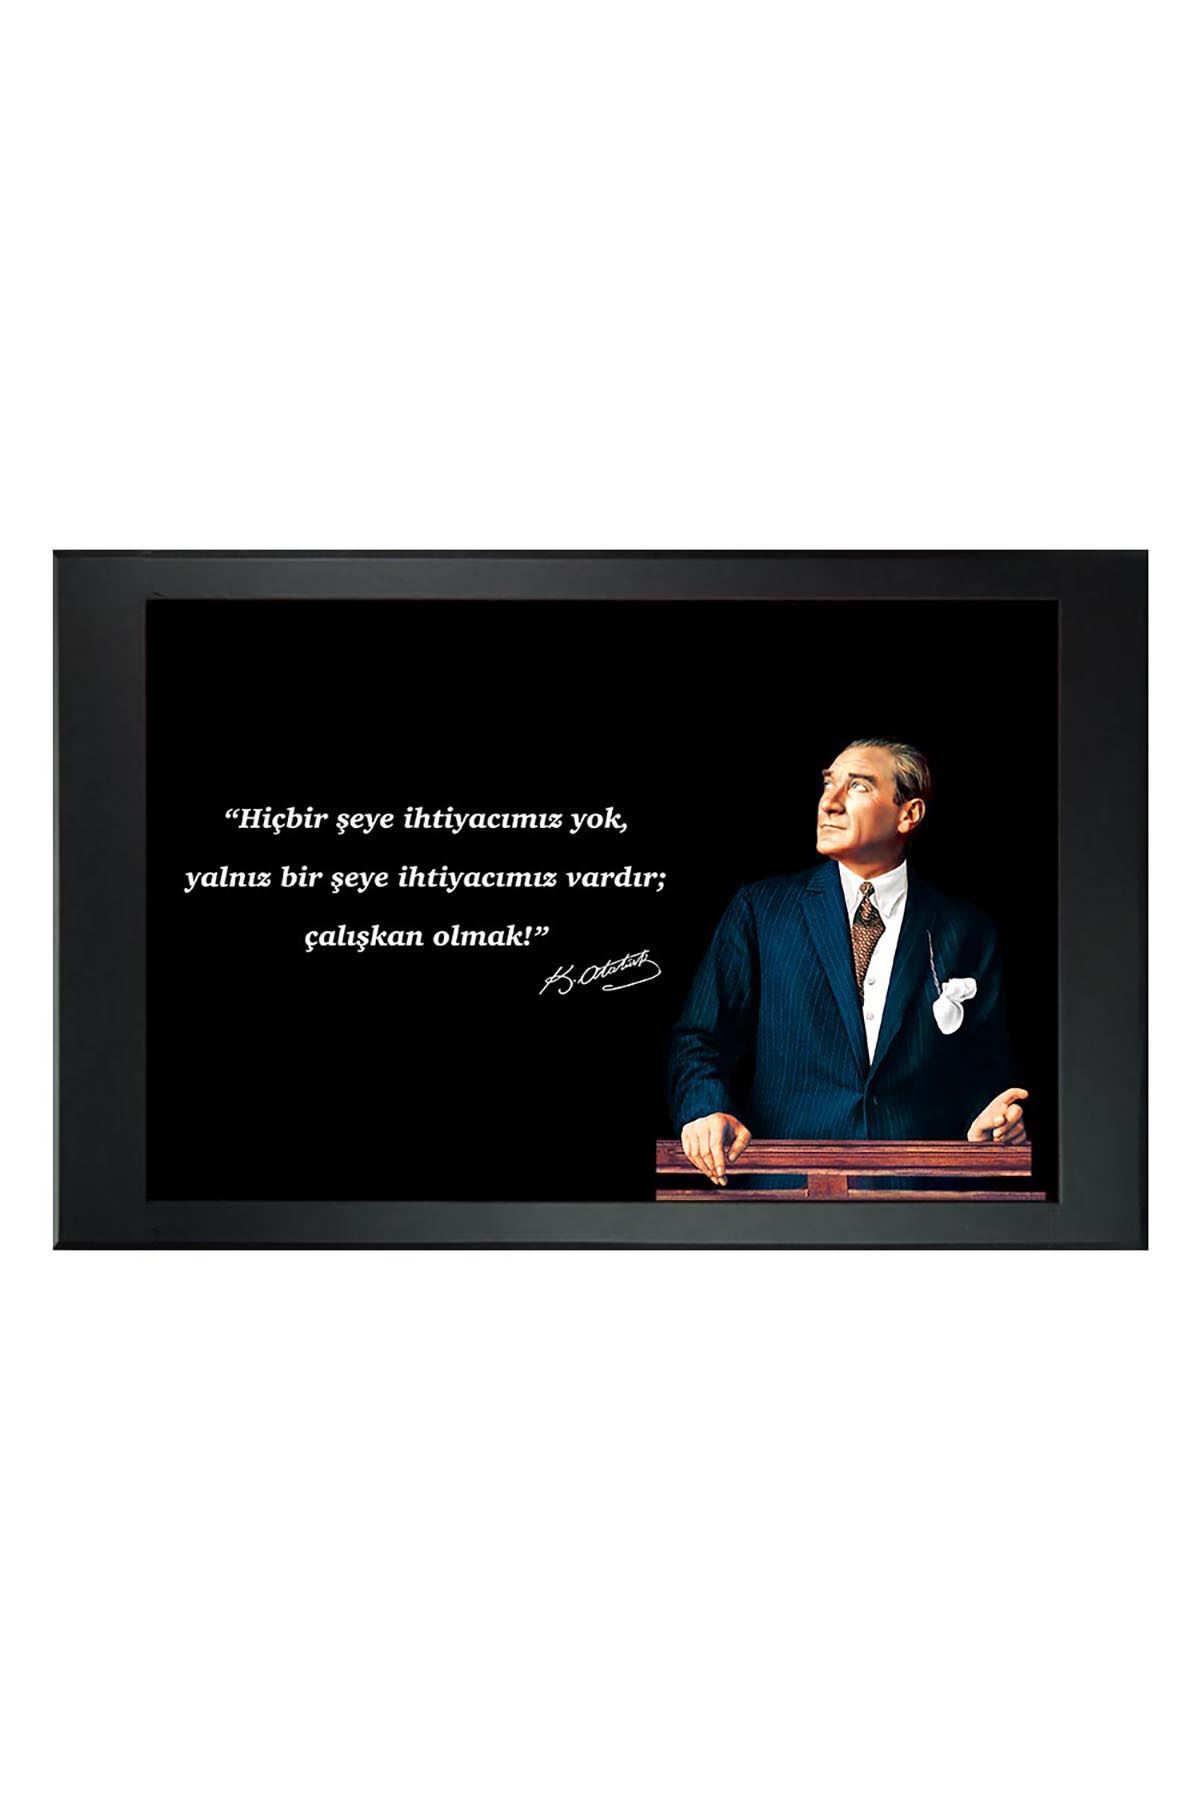 Atatürk in Council Printed Manager Board | Printed Manager Board | Leather Framed Board | High Quality Manager Board